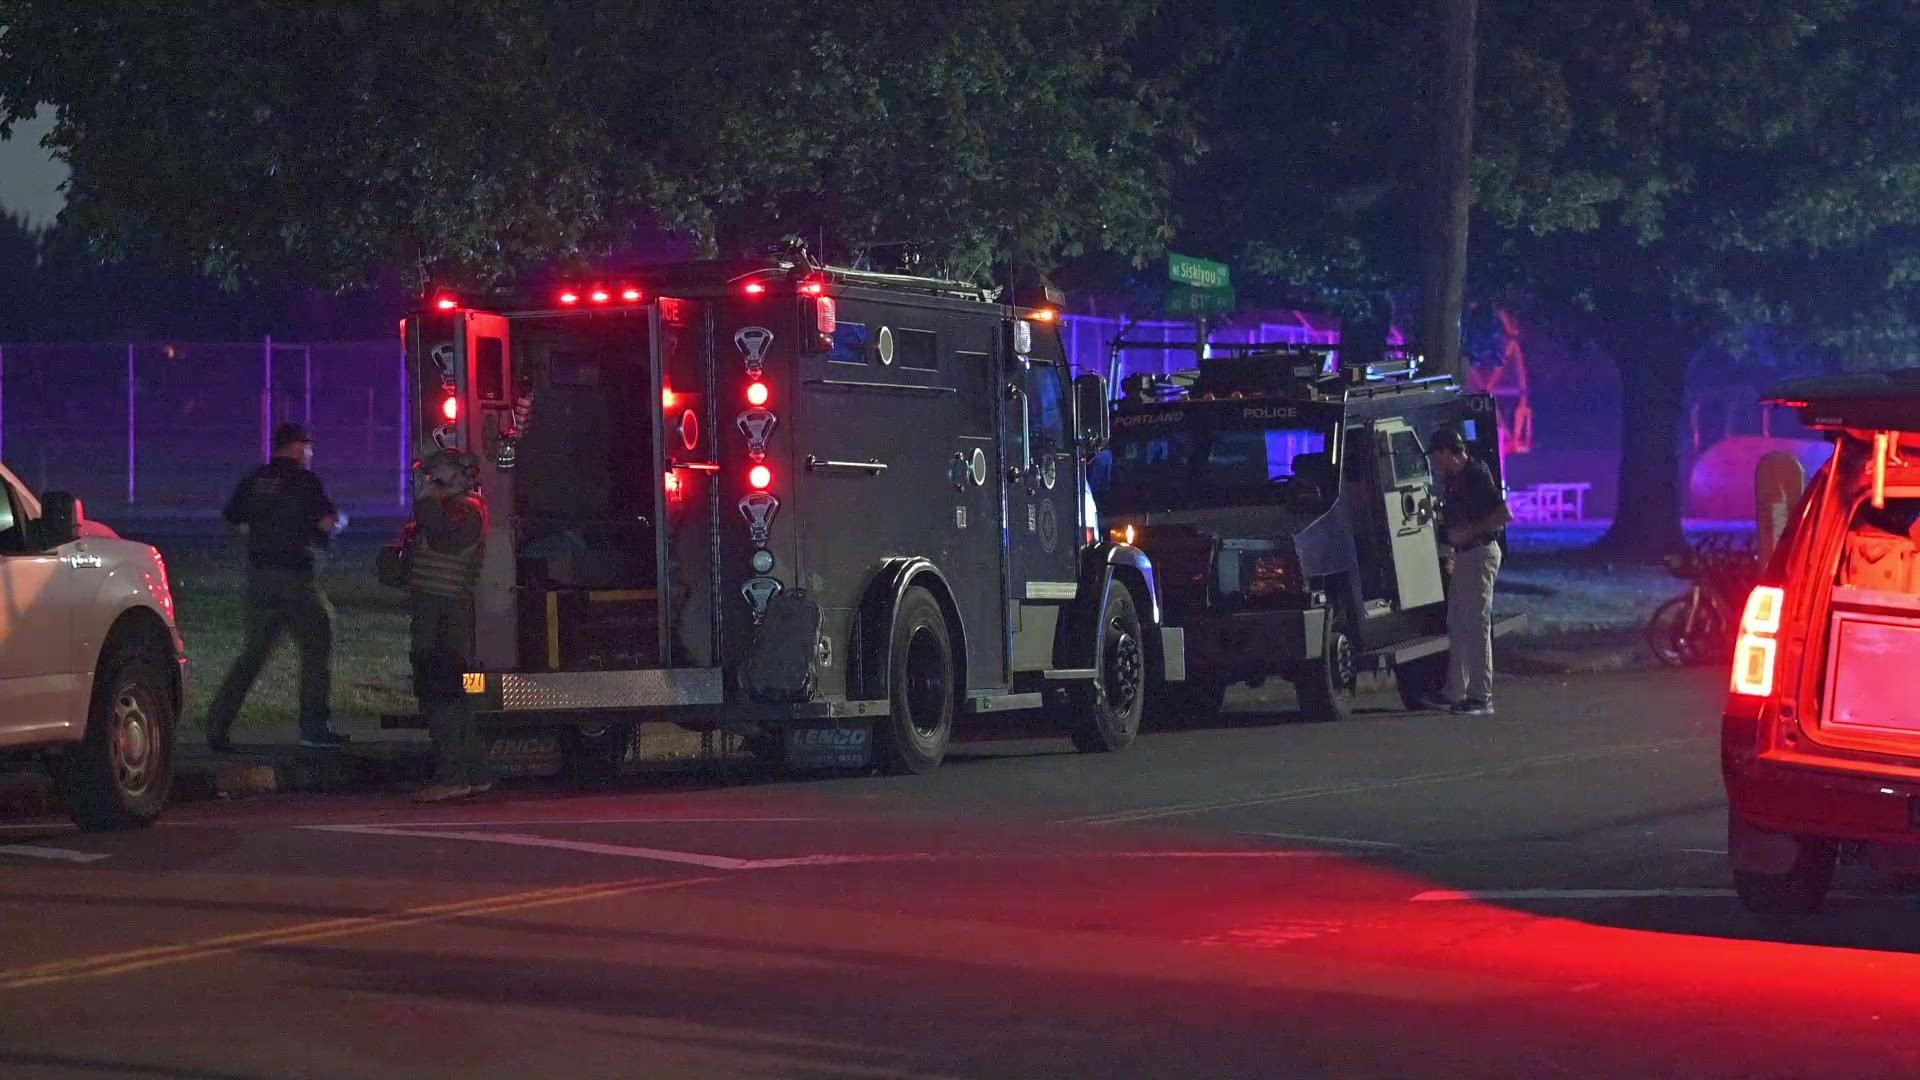 Portland police shut down a neighborhood in Northeast Portland early Sunday morning to search for youths they believe were involved in multiple robberies